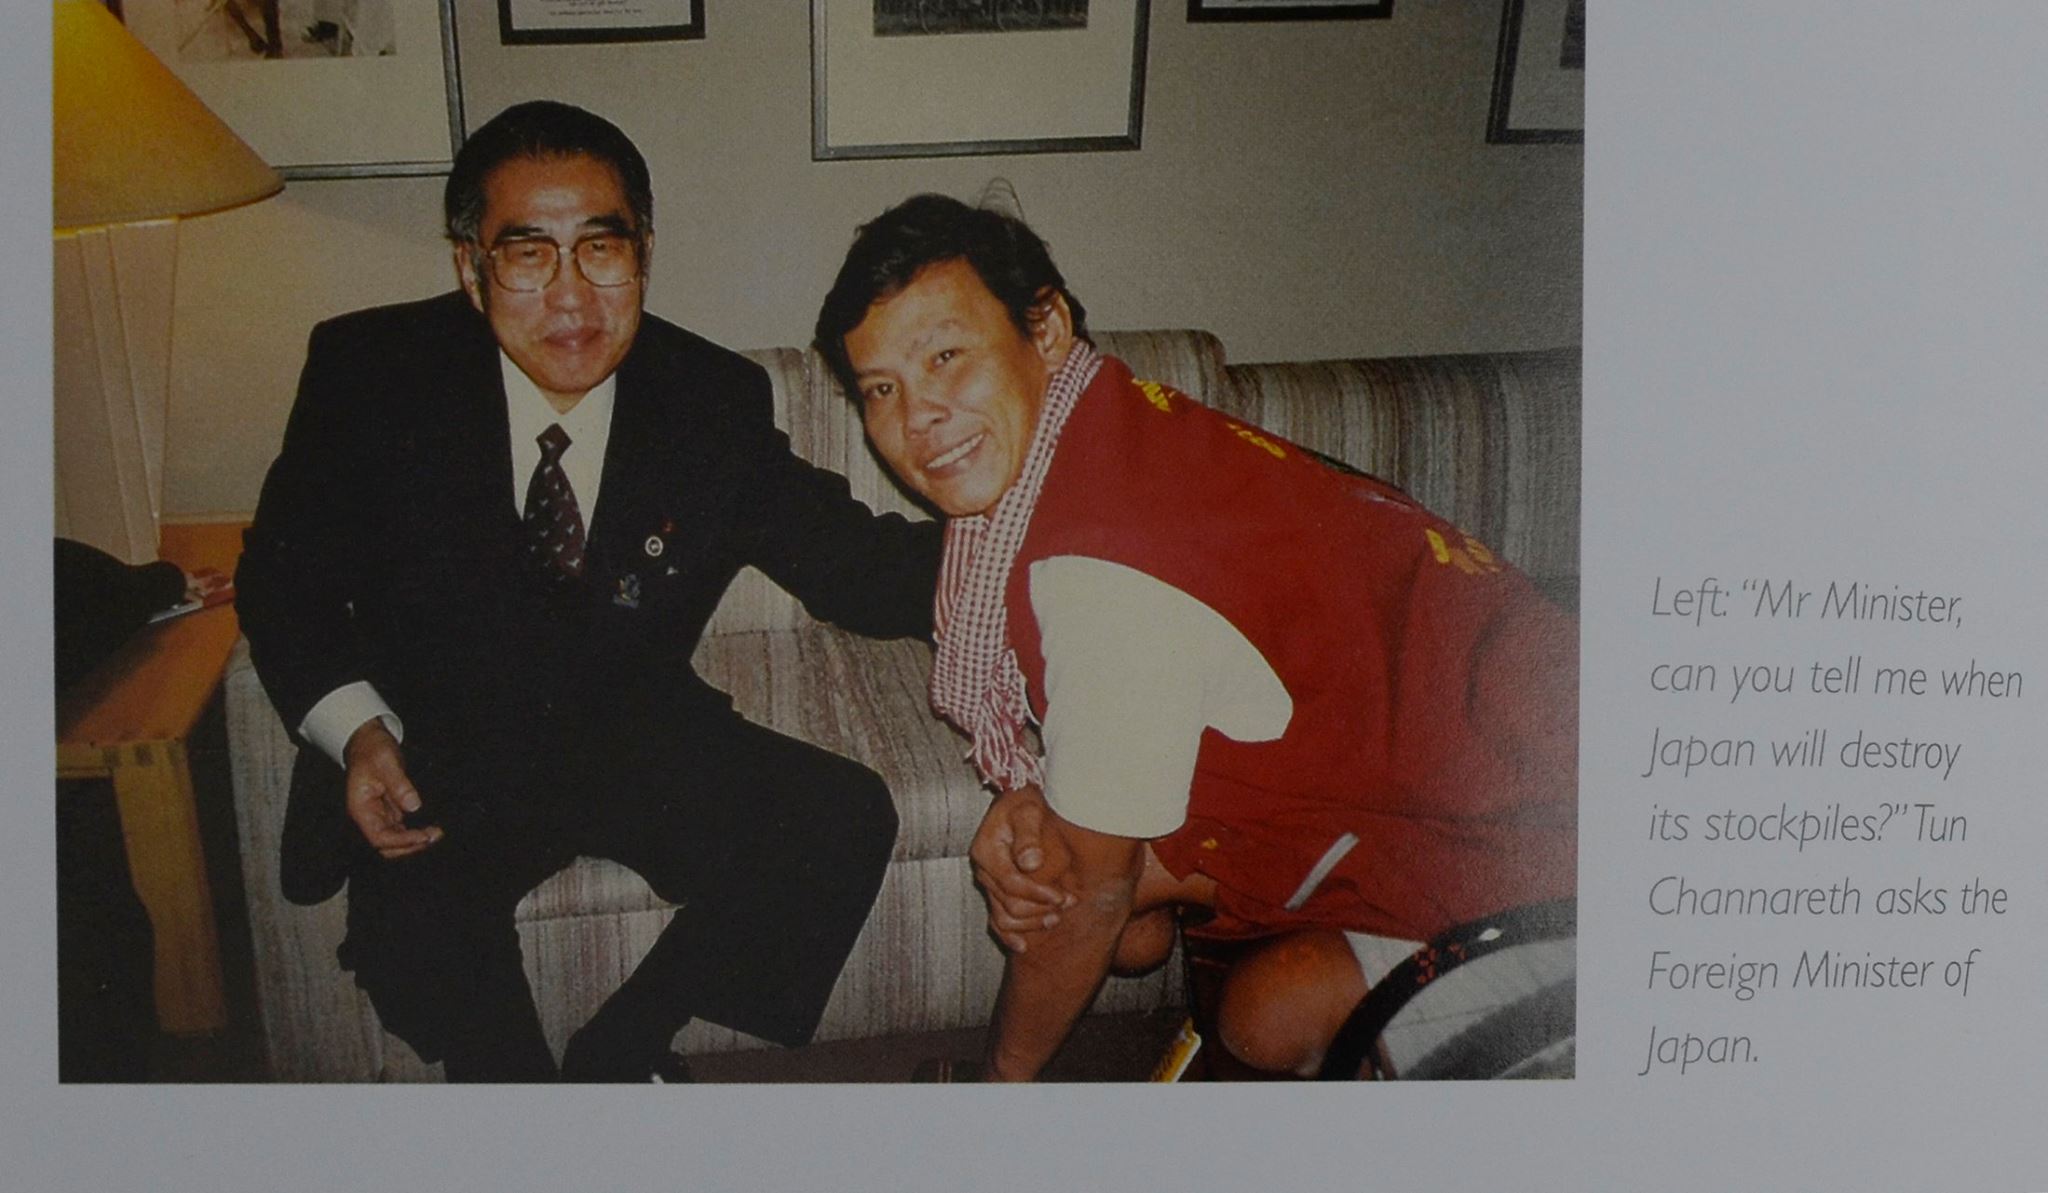 Tun Channareth and Foreign Minister of Japan